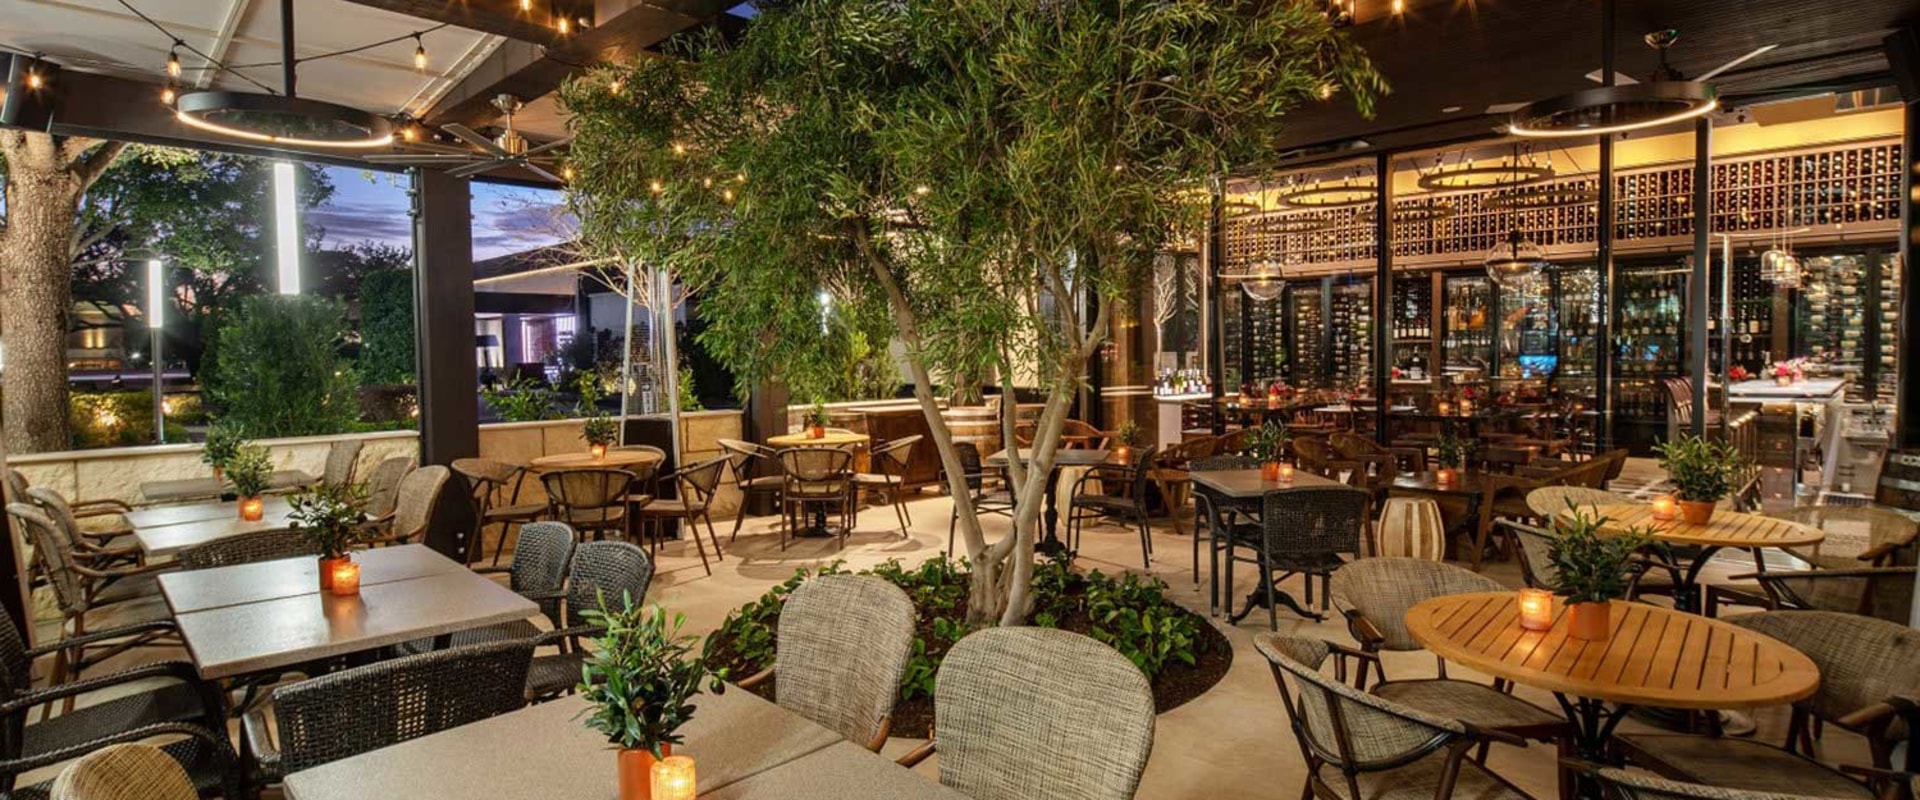 The Best Wine Bars with Outdoor Seating in Harris County, TX